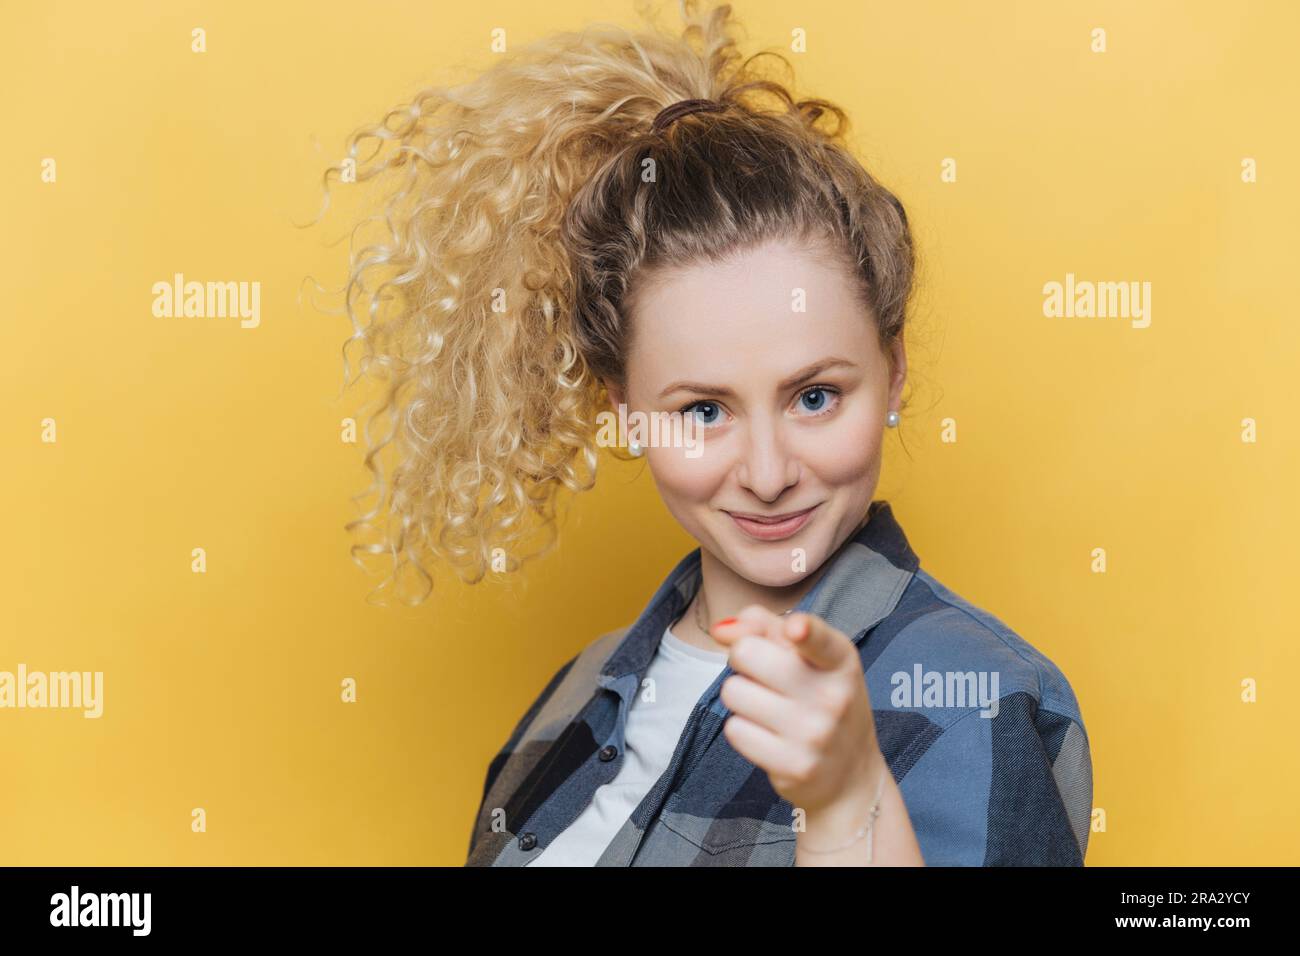 Confident woman chooses you, dressed casually, pointing at camera indoors. Stock Photo